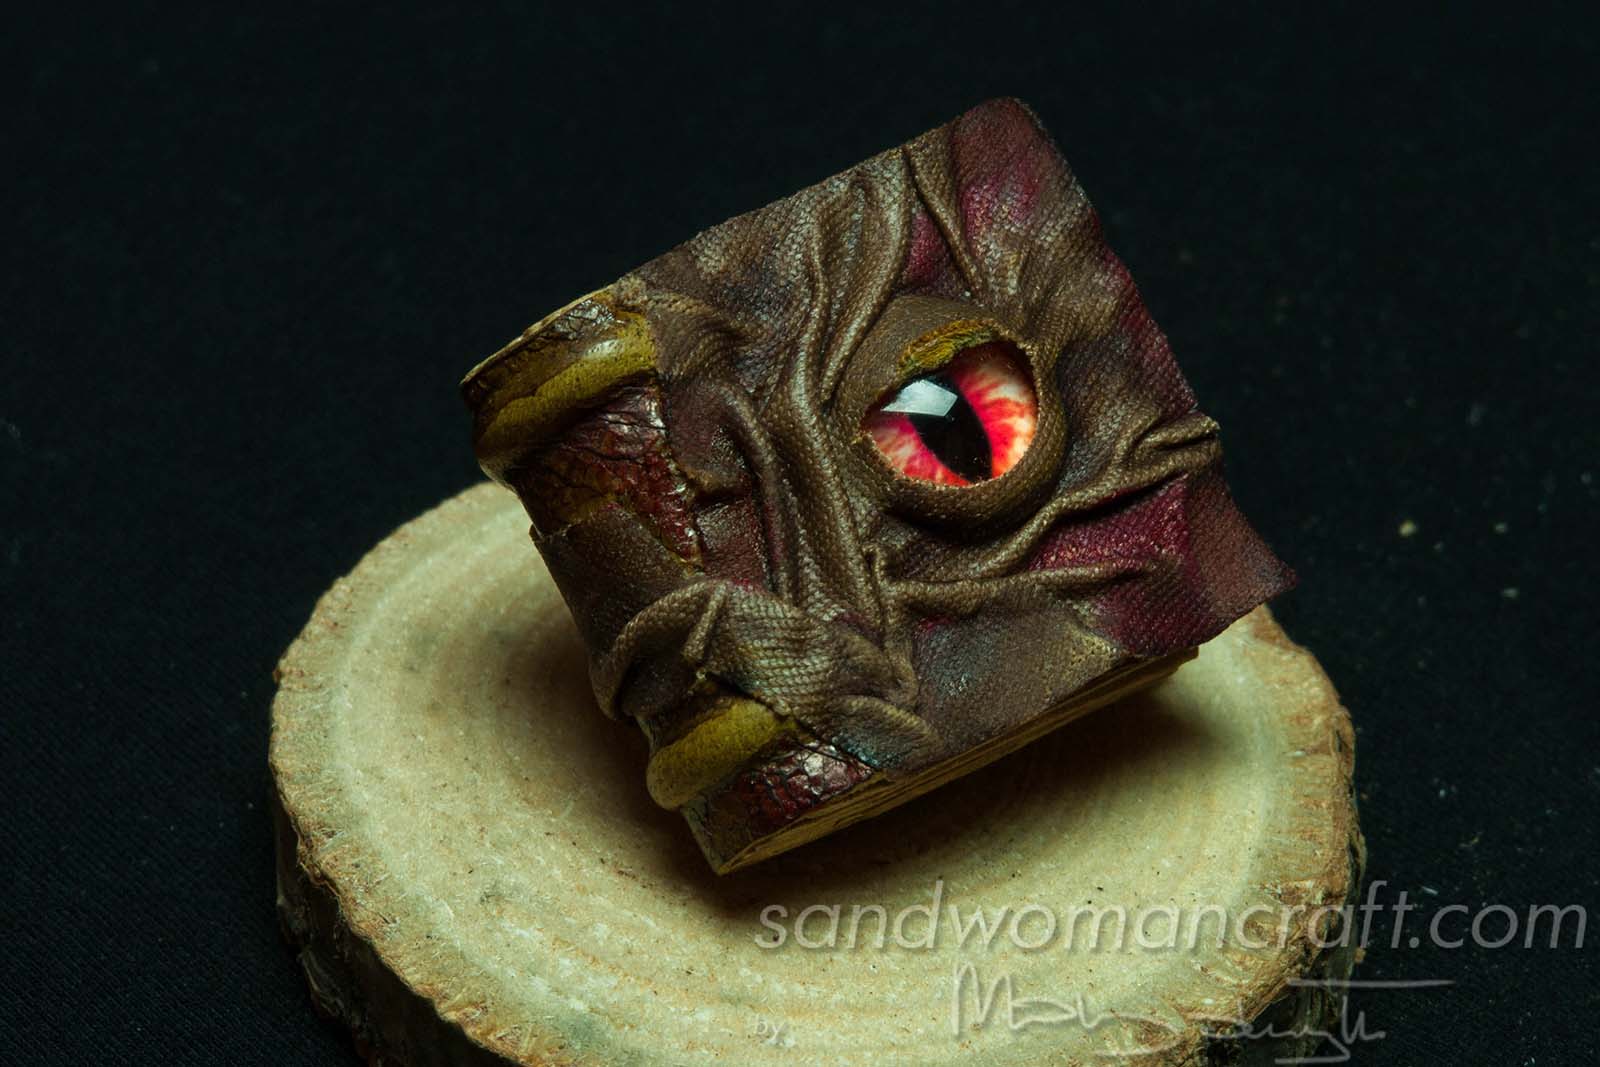 Miniature book with dragon's eye